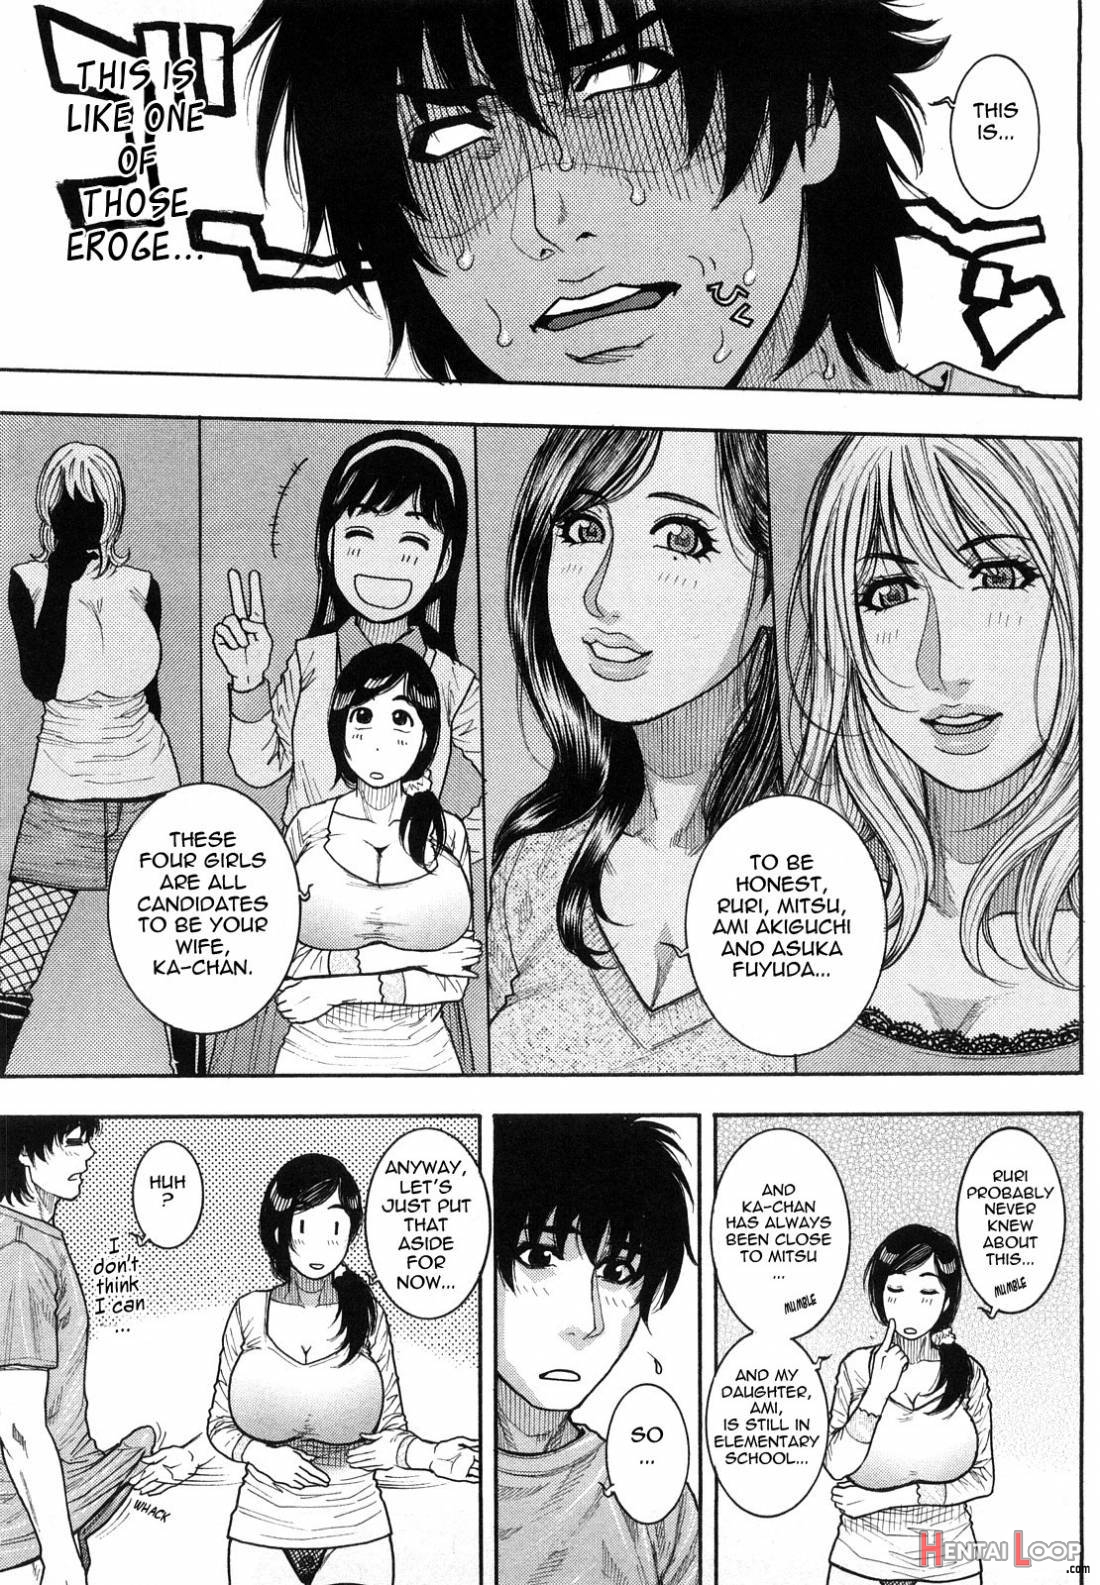 Zutto Onee-chan No Turn!! page 109